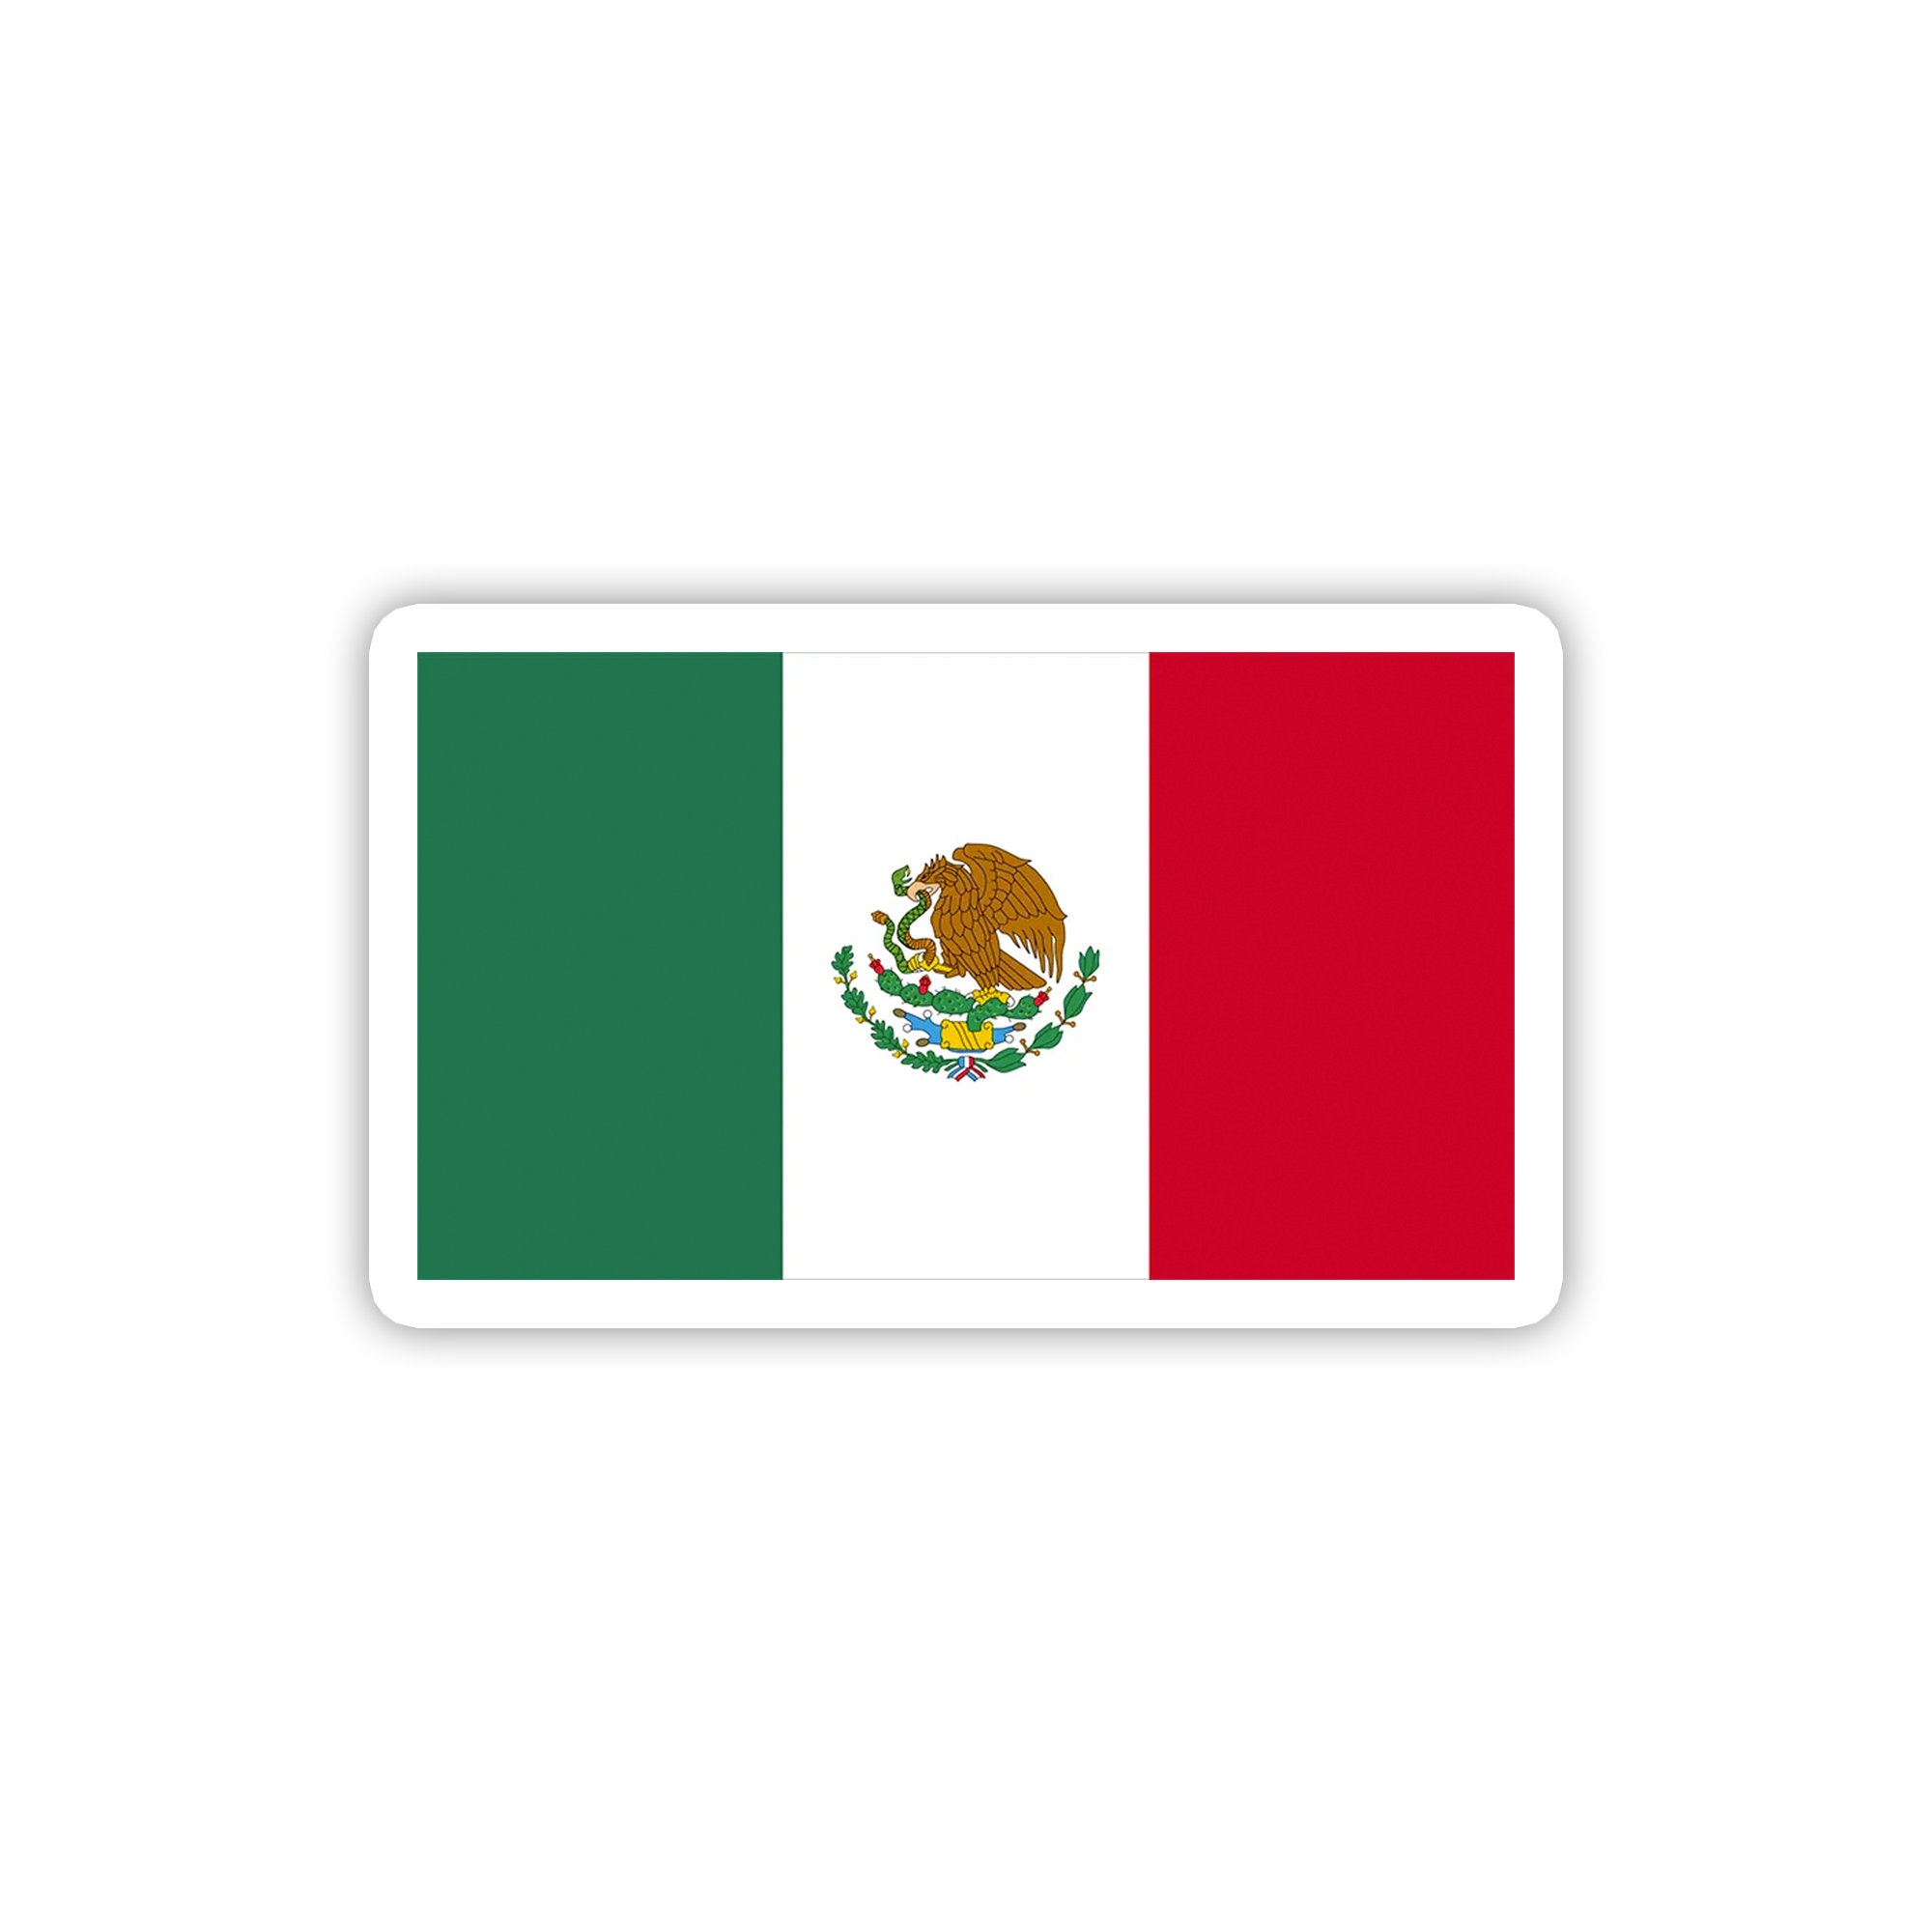 Augwed 30 Pcs Stickers Mexico Flag Decals Gift Tags Mexico Stickers Country  Souvenir Decorations Stickers for Water Bottles Laptop Envelope Seals